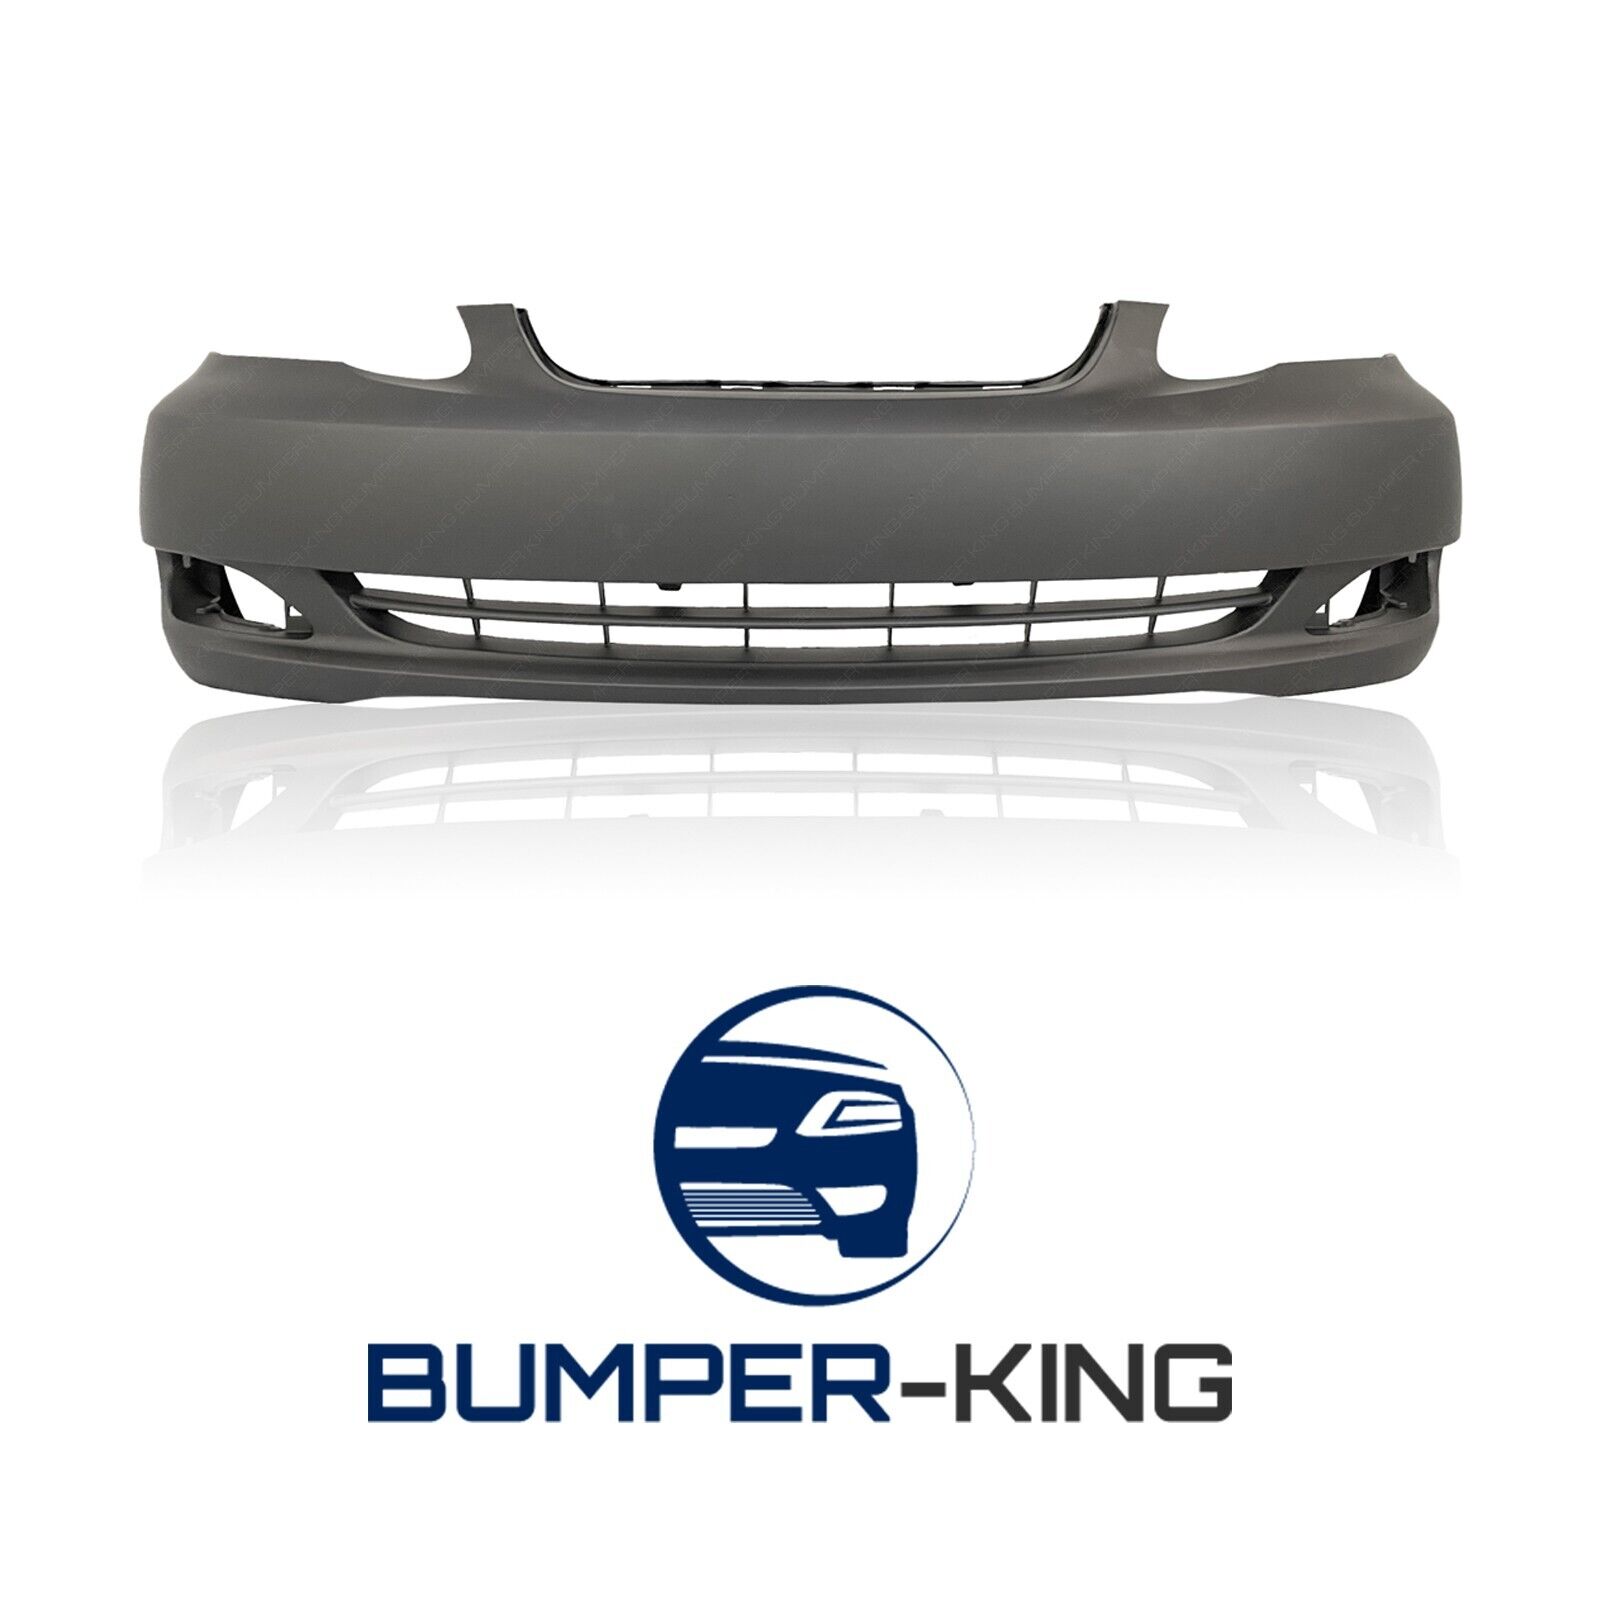 BUMPER-KING Primered Front Bumper Cover for 2005-2008 Toyota Corolla CE LE 4dr